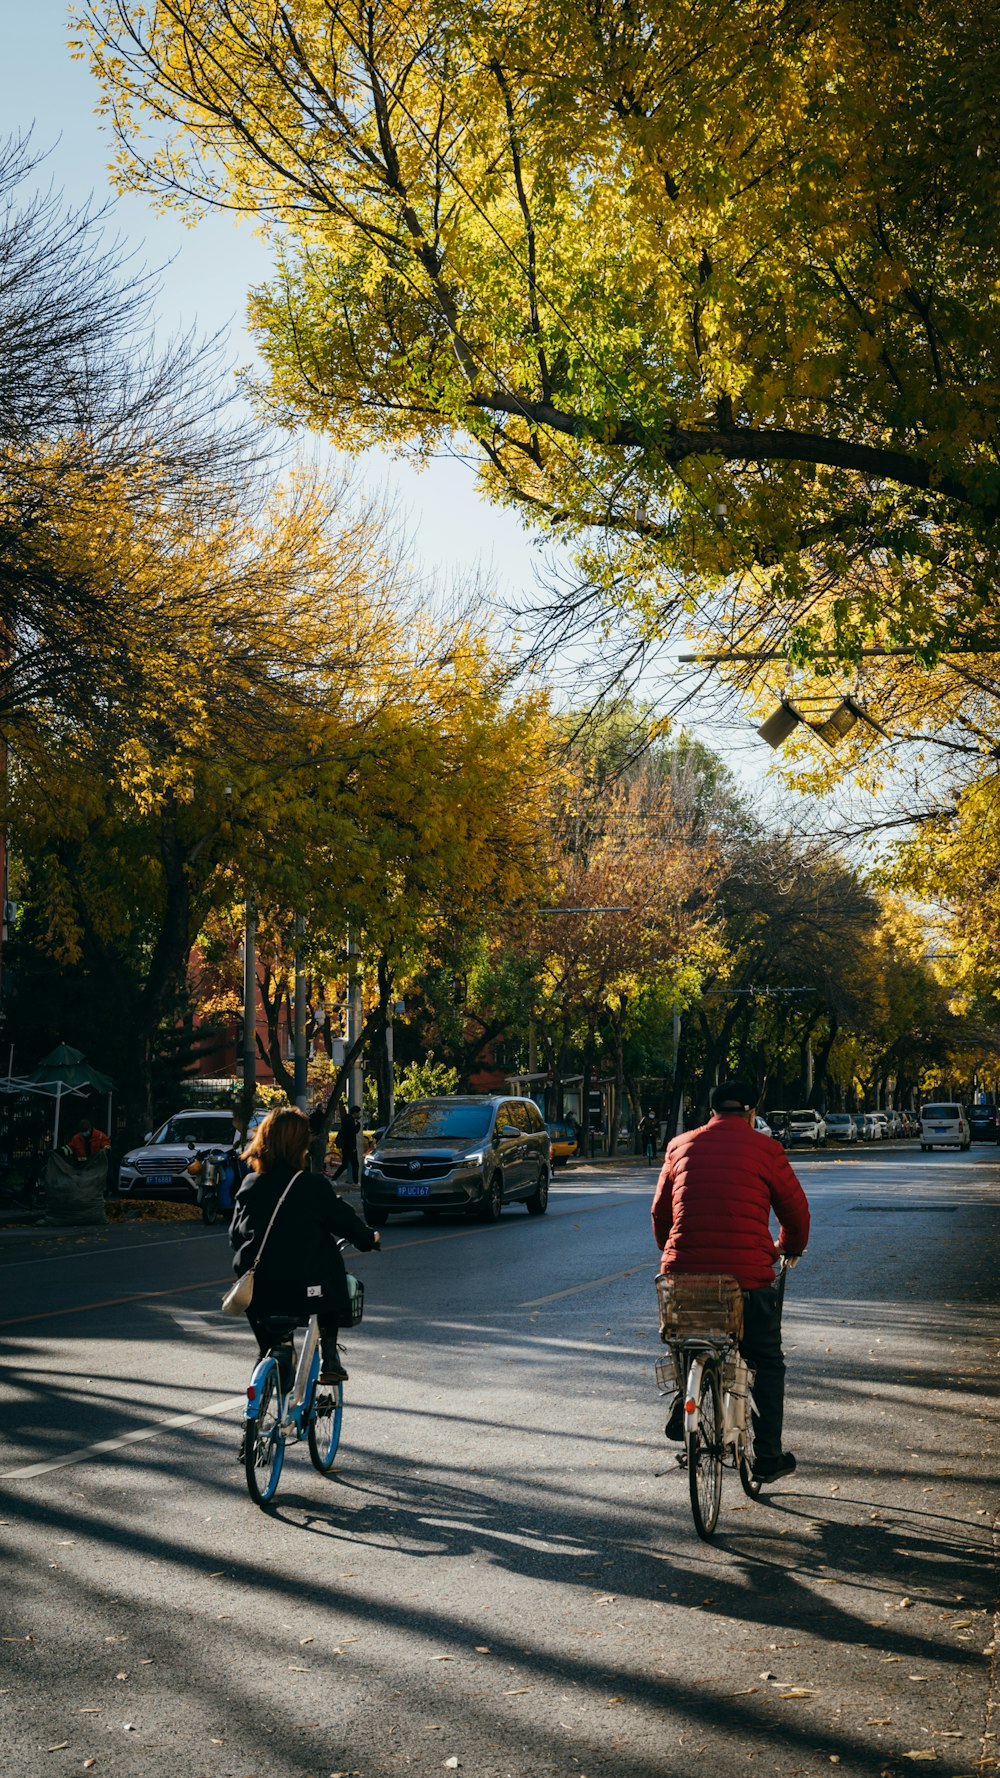 a man and woman riding bicycles on a road with trees on either side